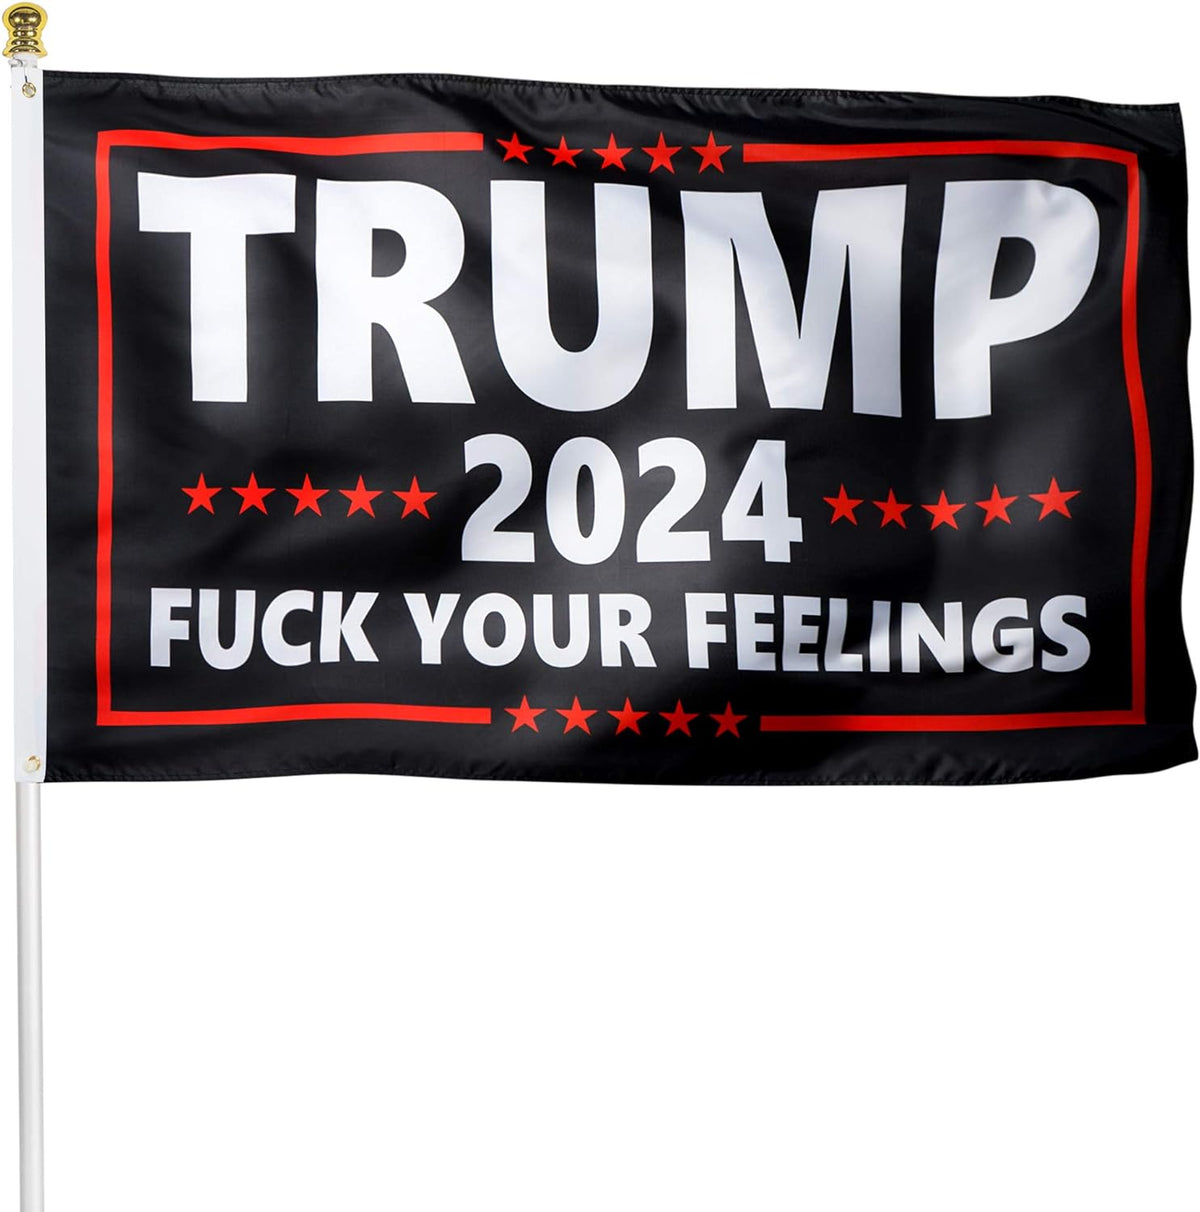 XIFAN Premium Flag for Trump 2024 3x5 Ft Polyester Fuck Your Feelings Banner with Brass Grommets Indoor Outdoor Decoration